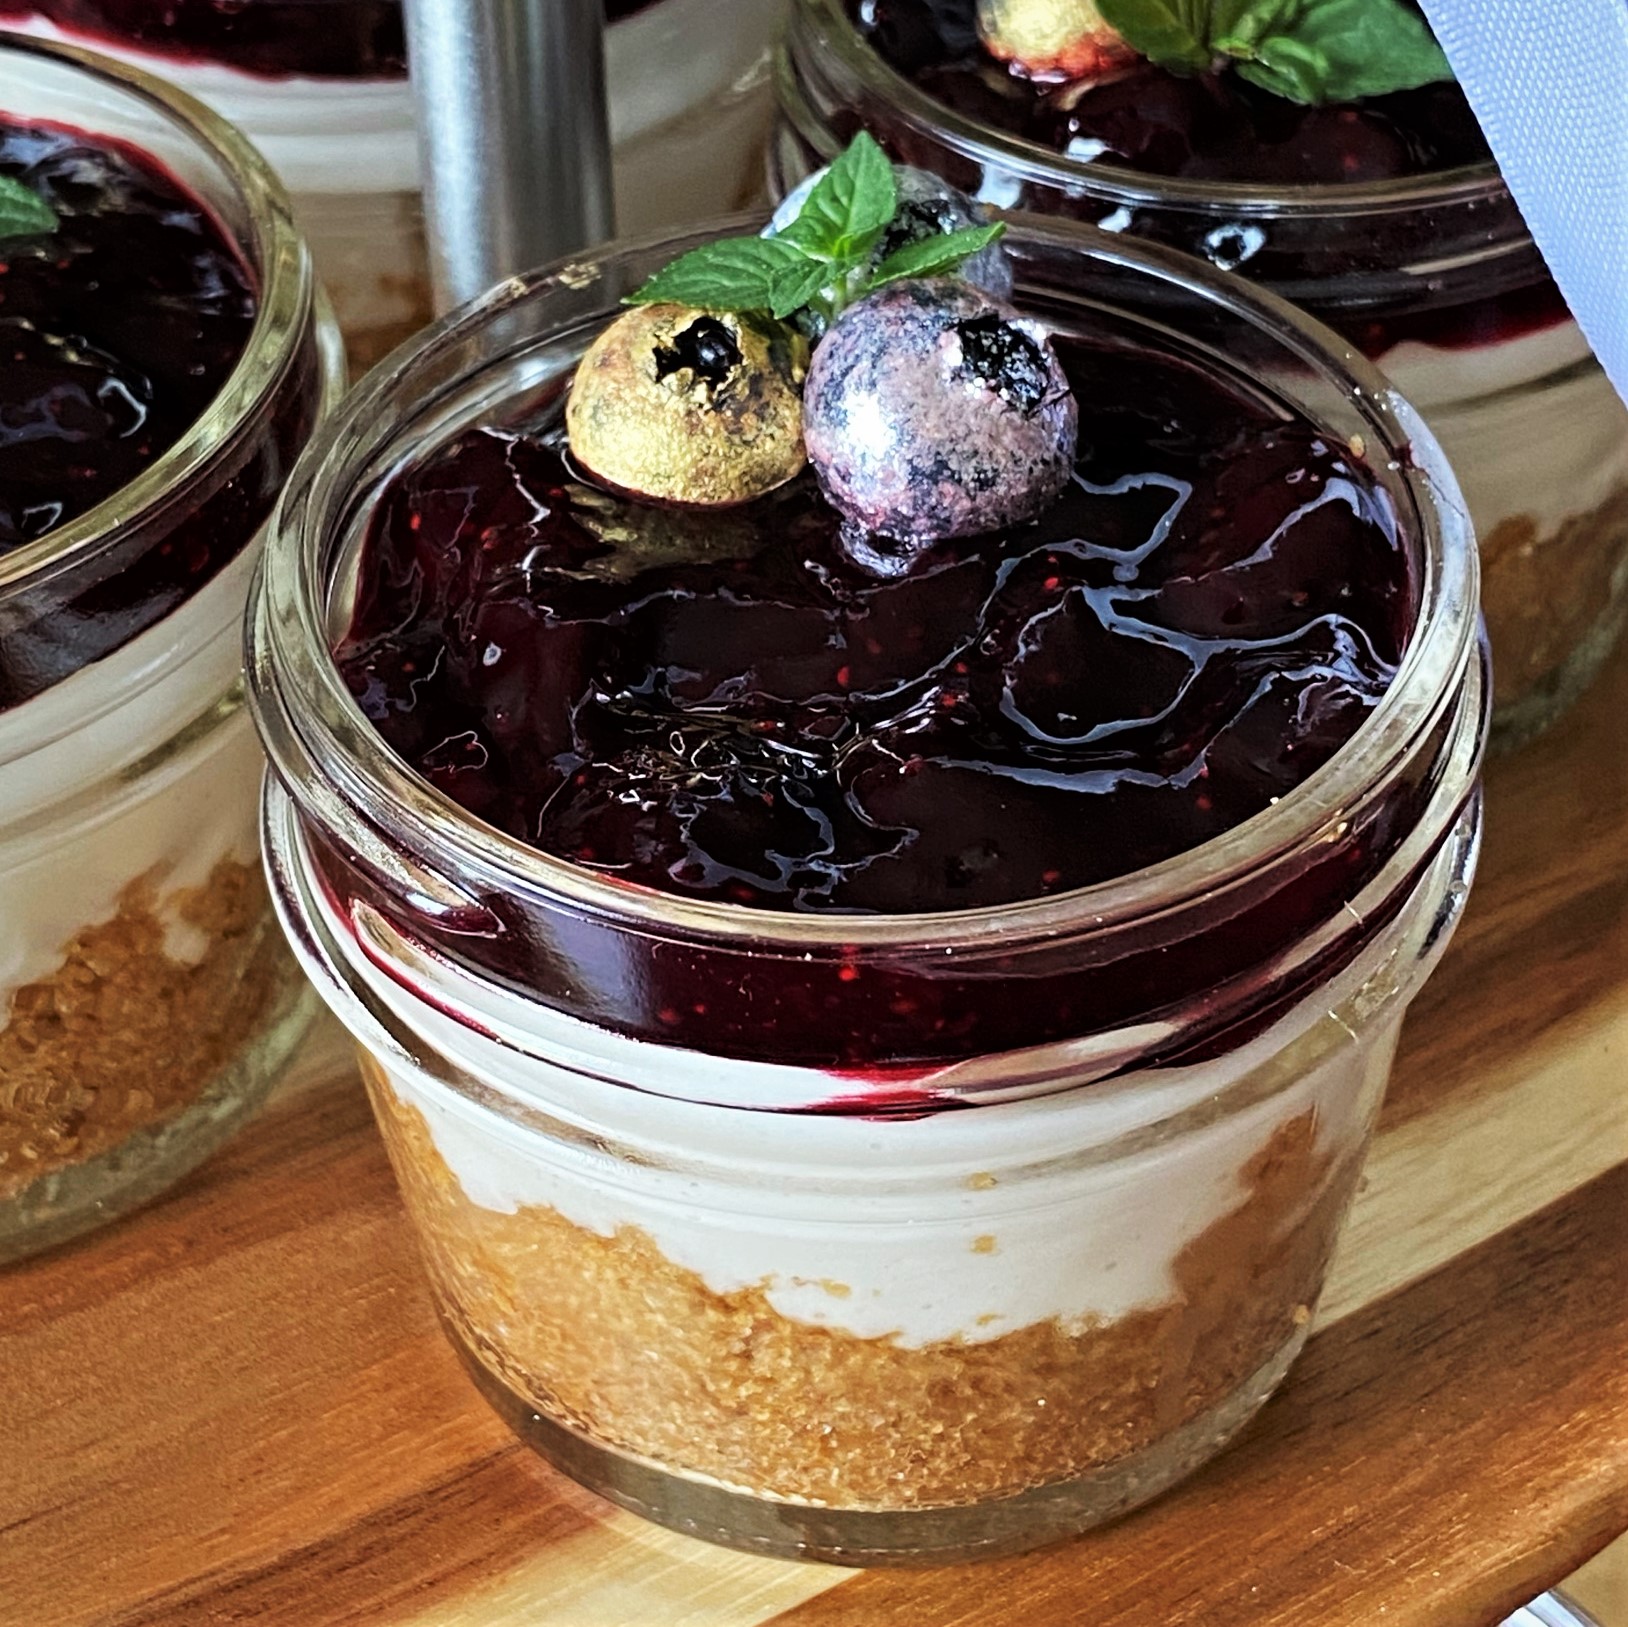 Personal Blueberry Cheesecakes